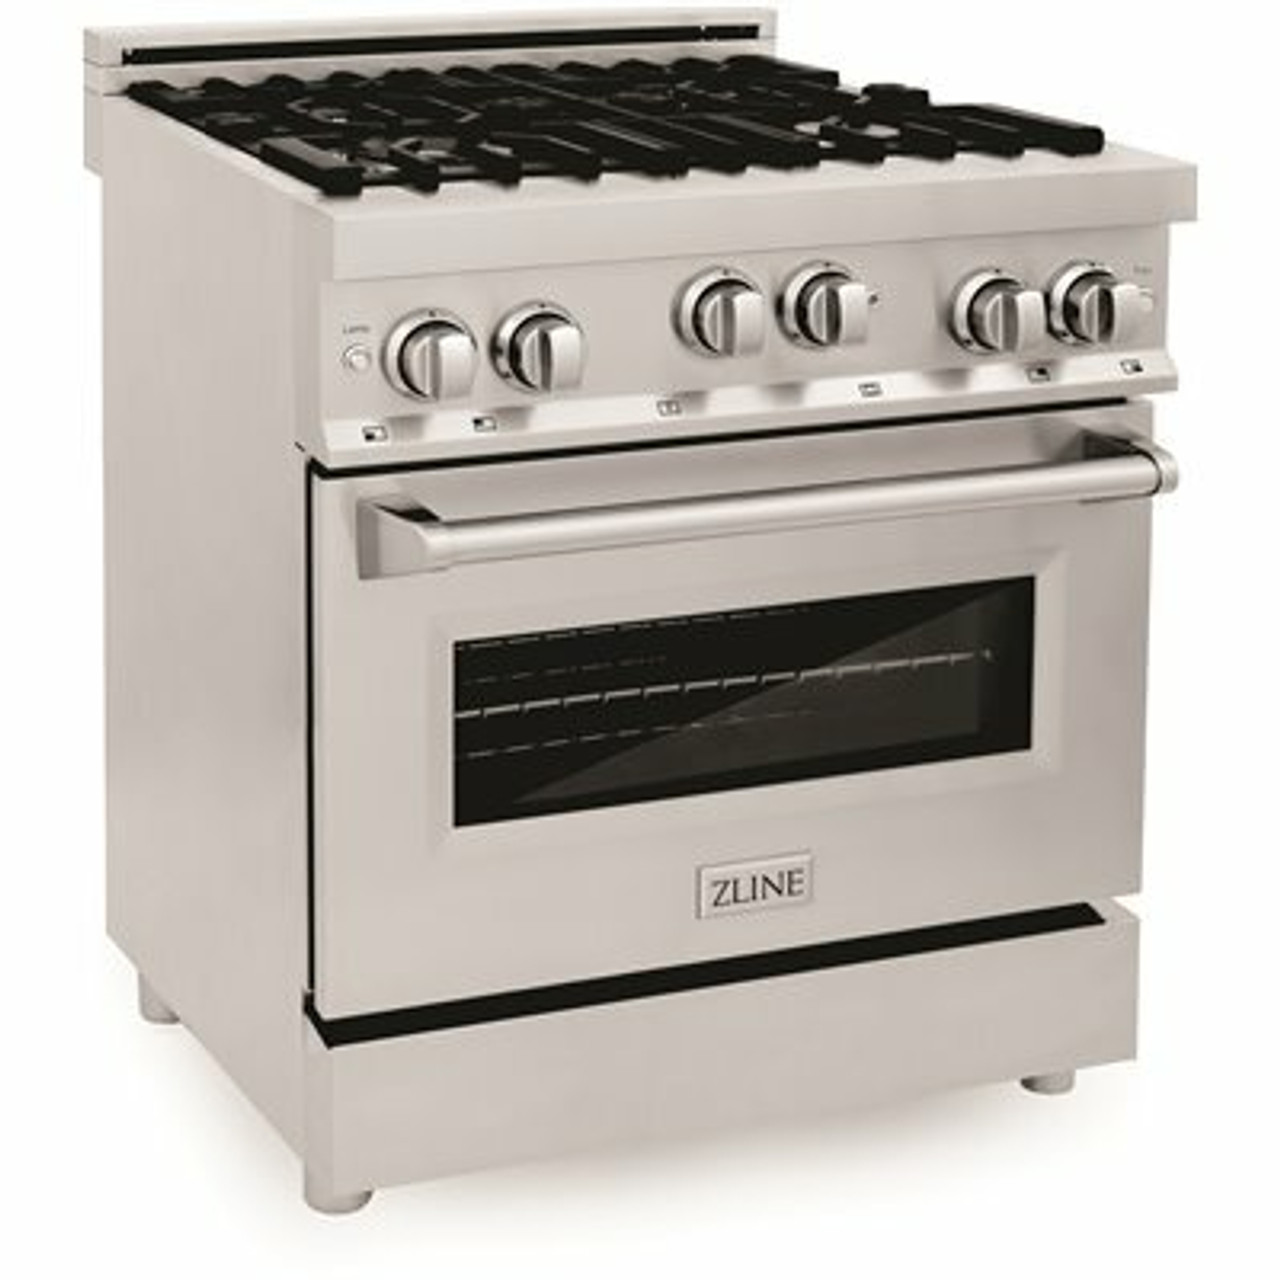 Zline Kitchen And Bath Zline 30 In. 4.0 Cu. Ft. Range With Gas Stove And Gas Oven In Stainless Steel (Rg30)